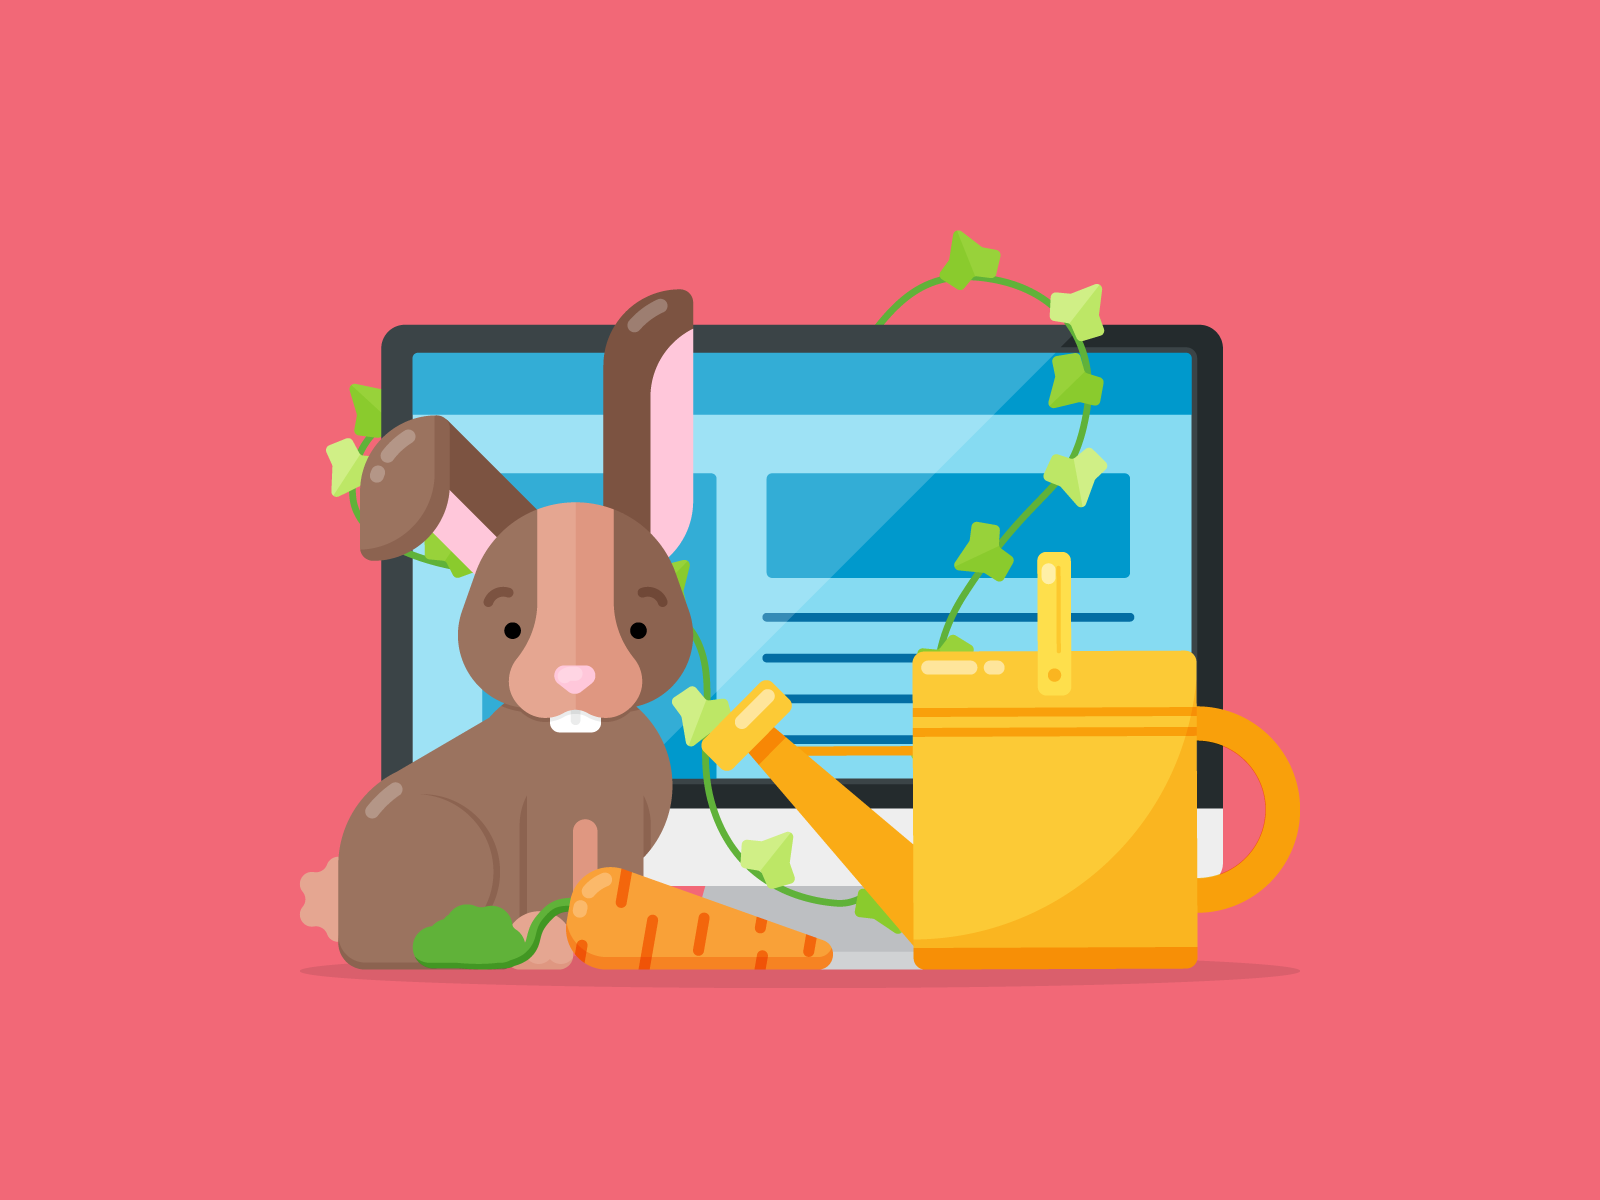 Website Growth (Plus a Rabbit!) plants carrot watering can business website growth rabbit bunny vector vector illustration